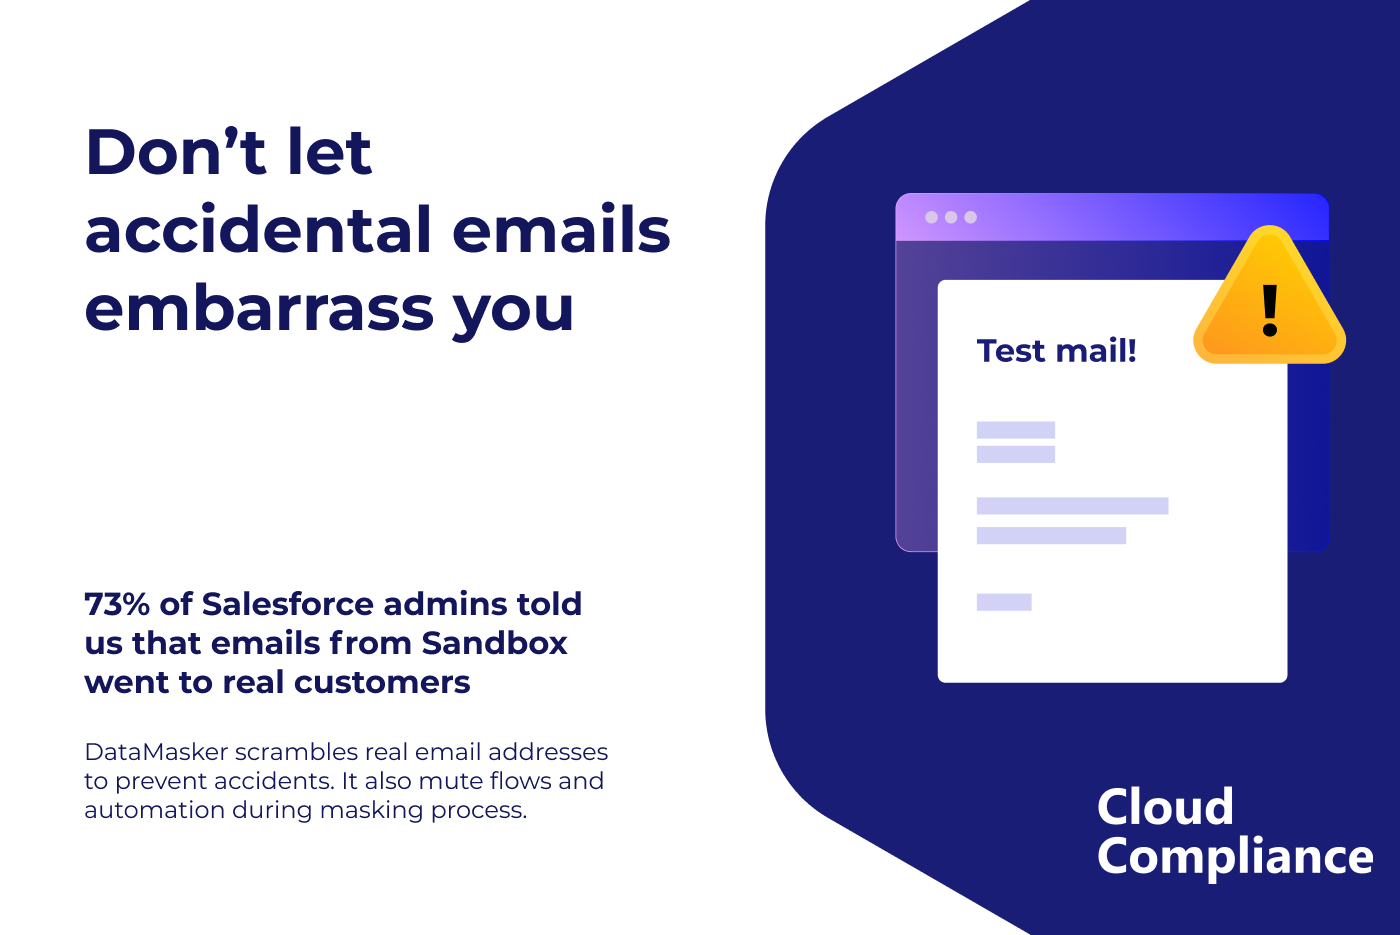 Don't let accidental emails embarras you